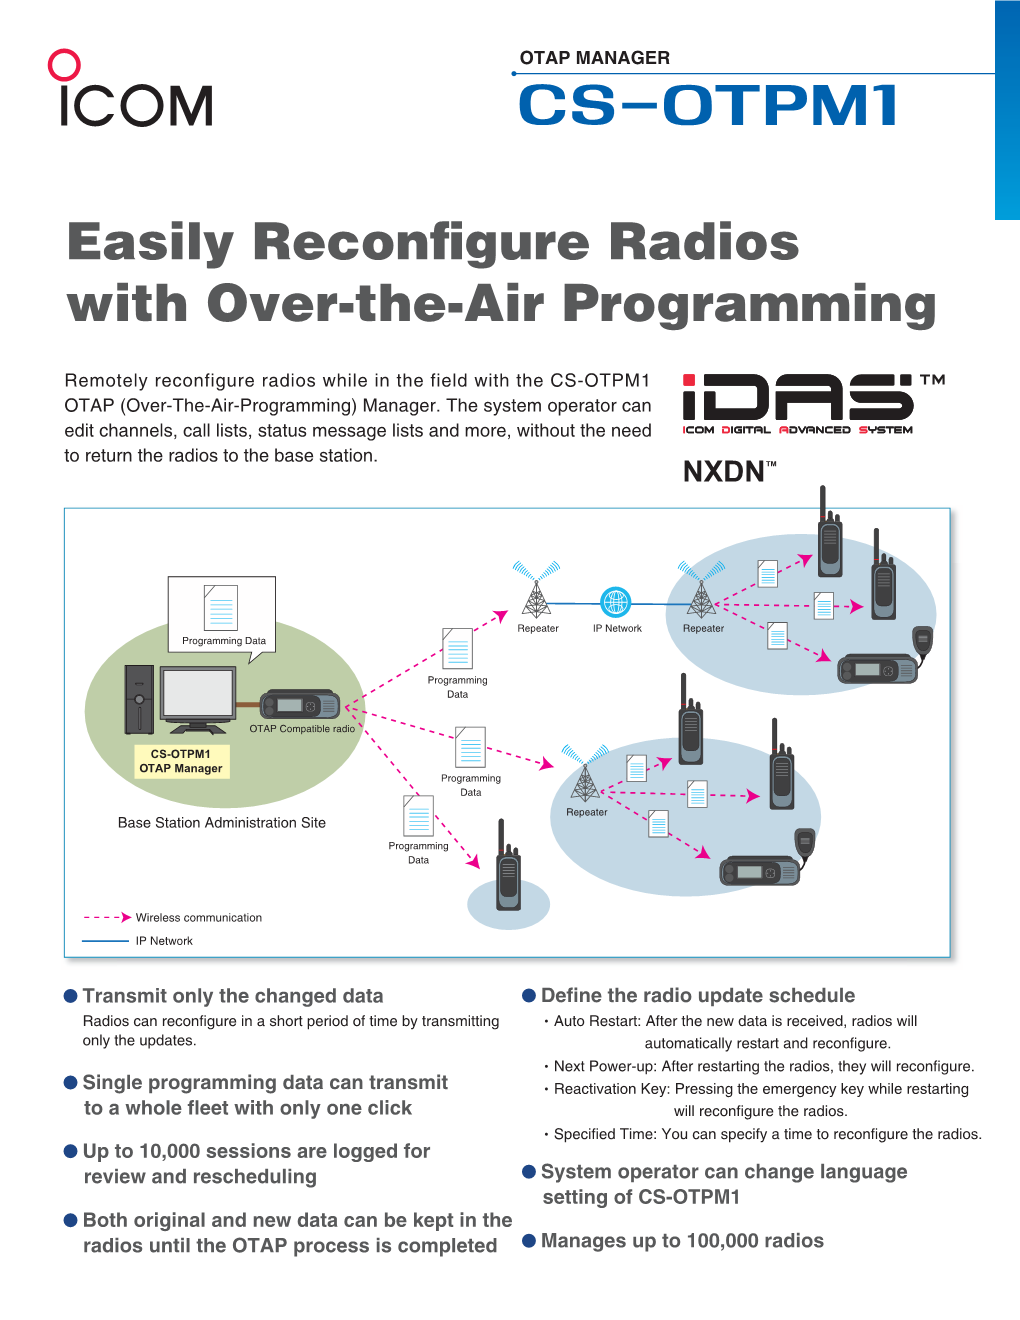 Easily Reconfigure Radios with Over-The-Air Programming